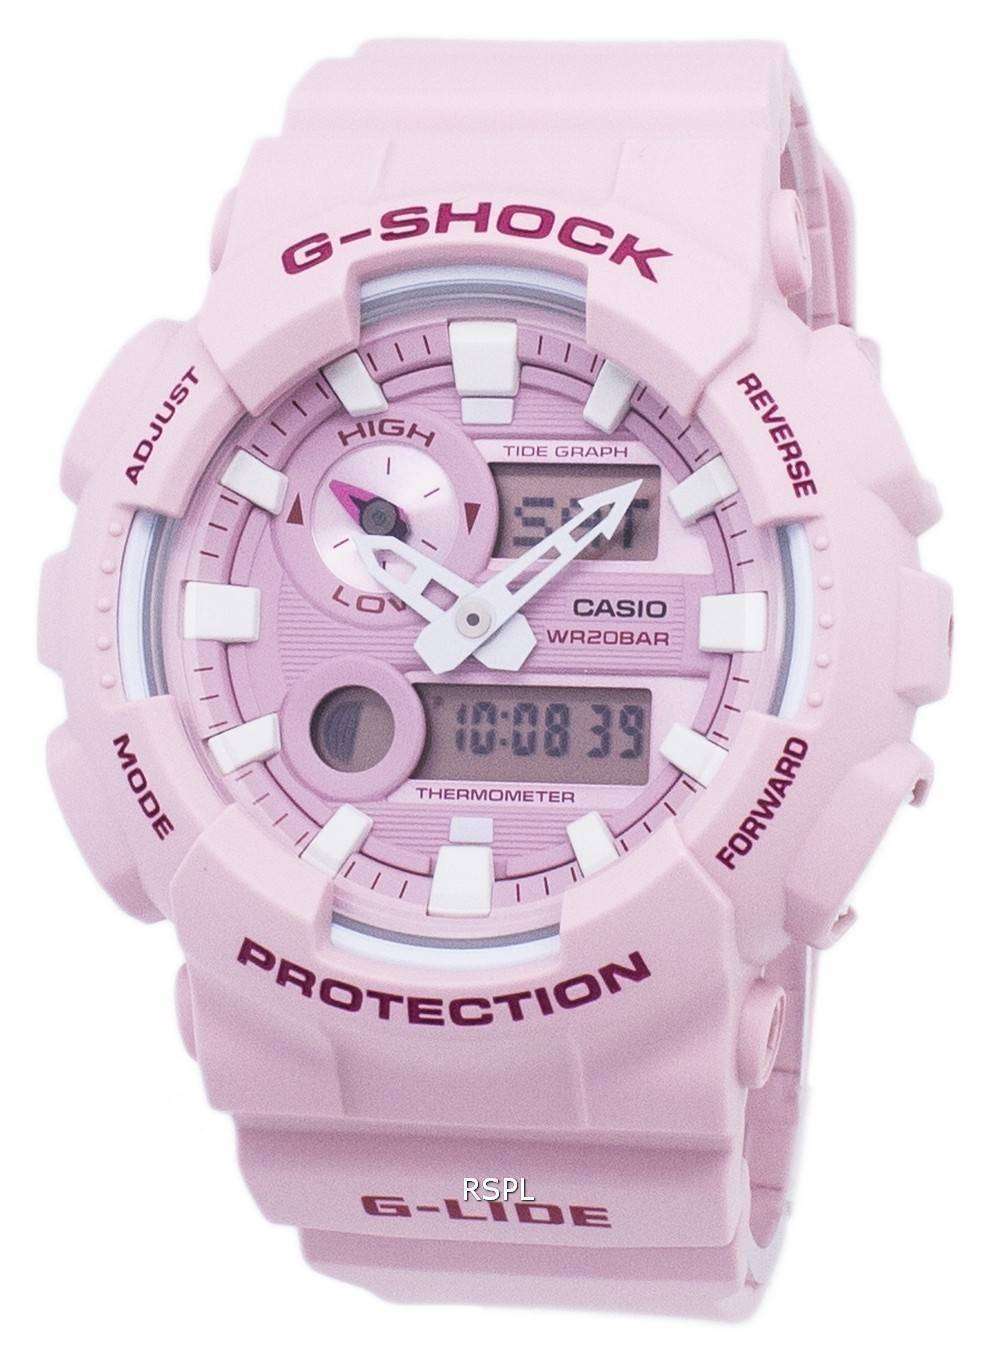 g shock with tide graph